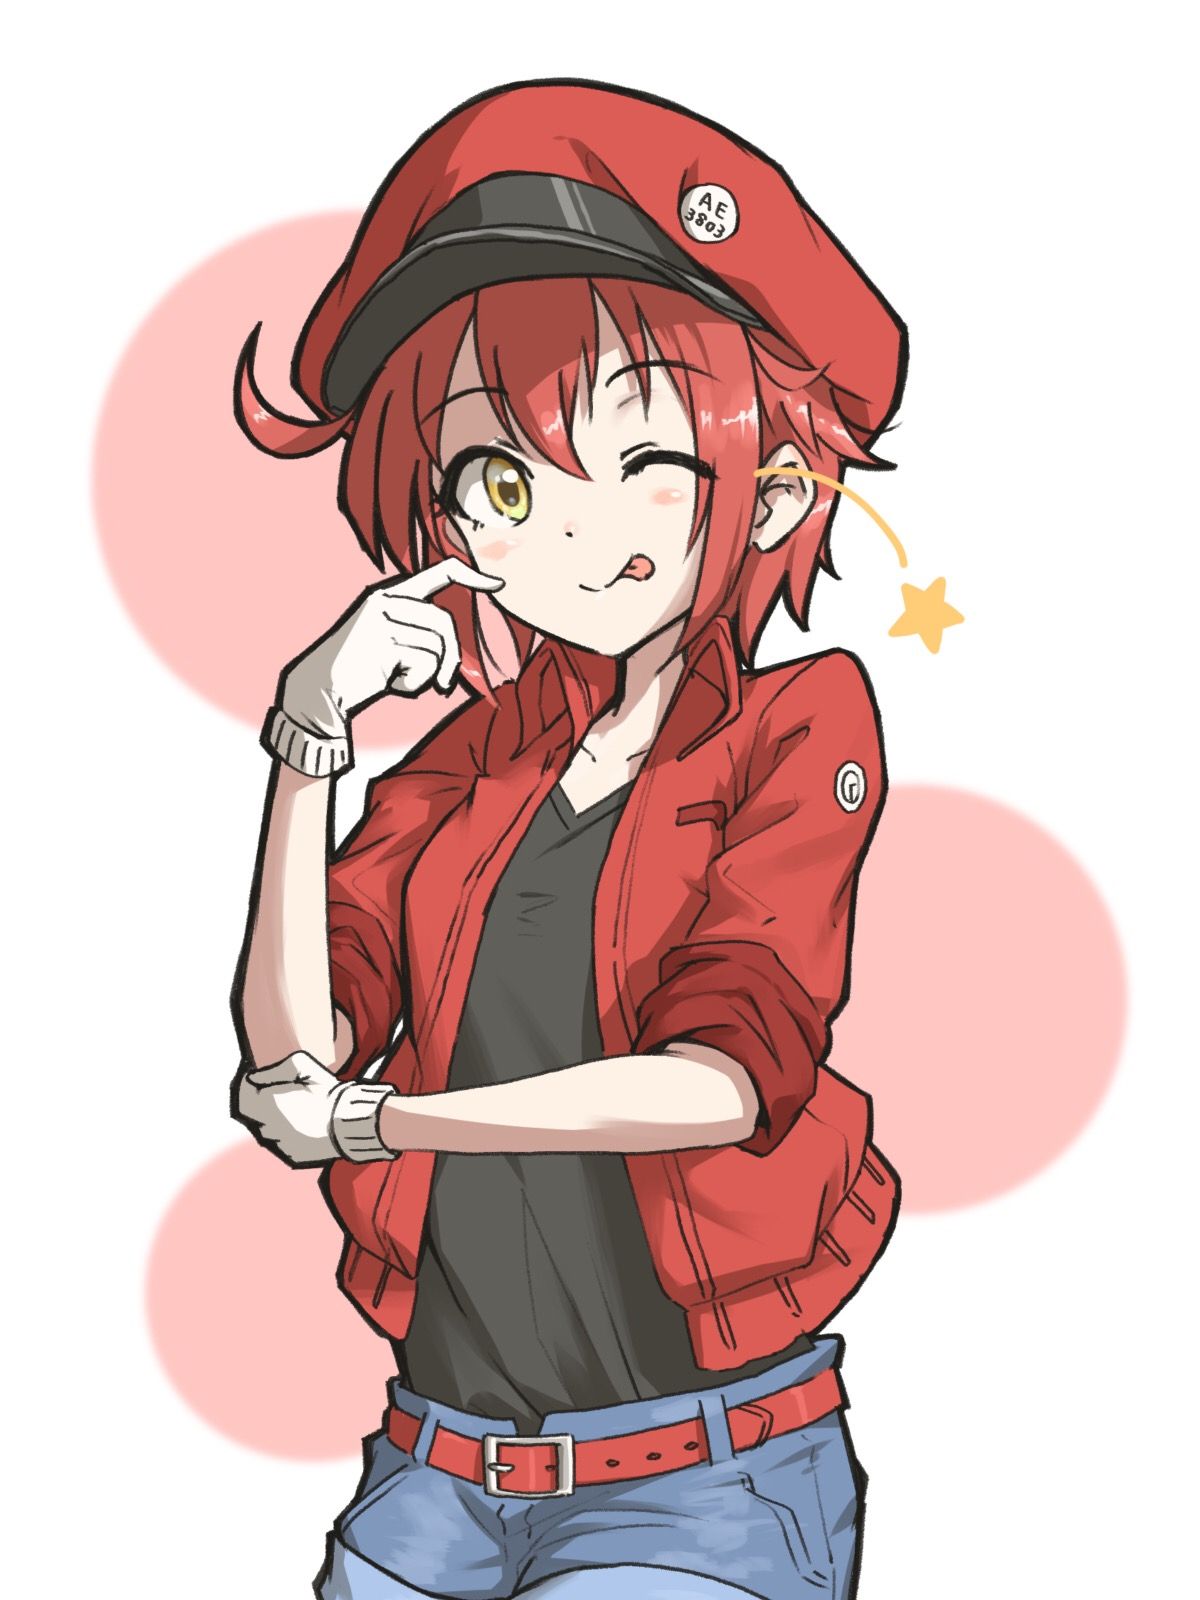 Red Blood Cell. Anime films, Anime people, Anime